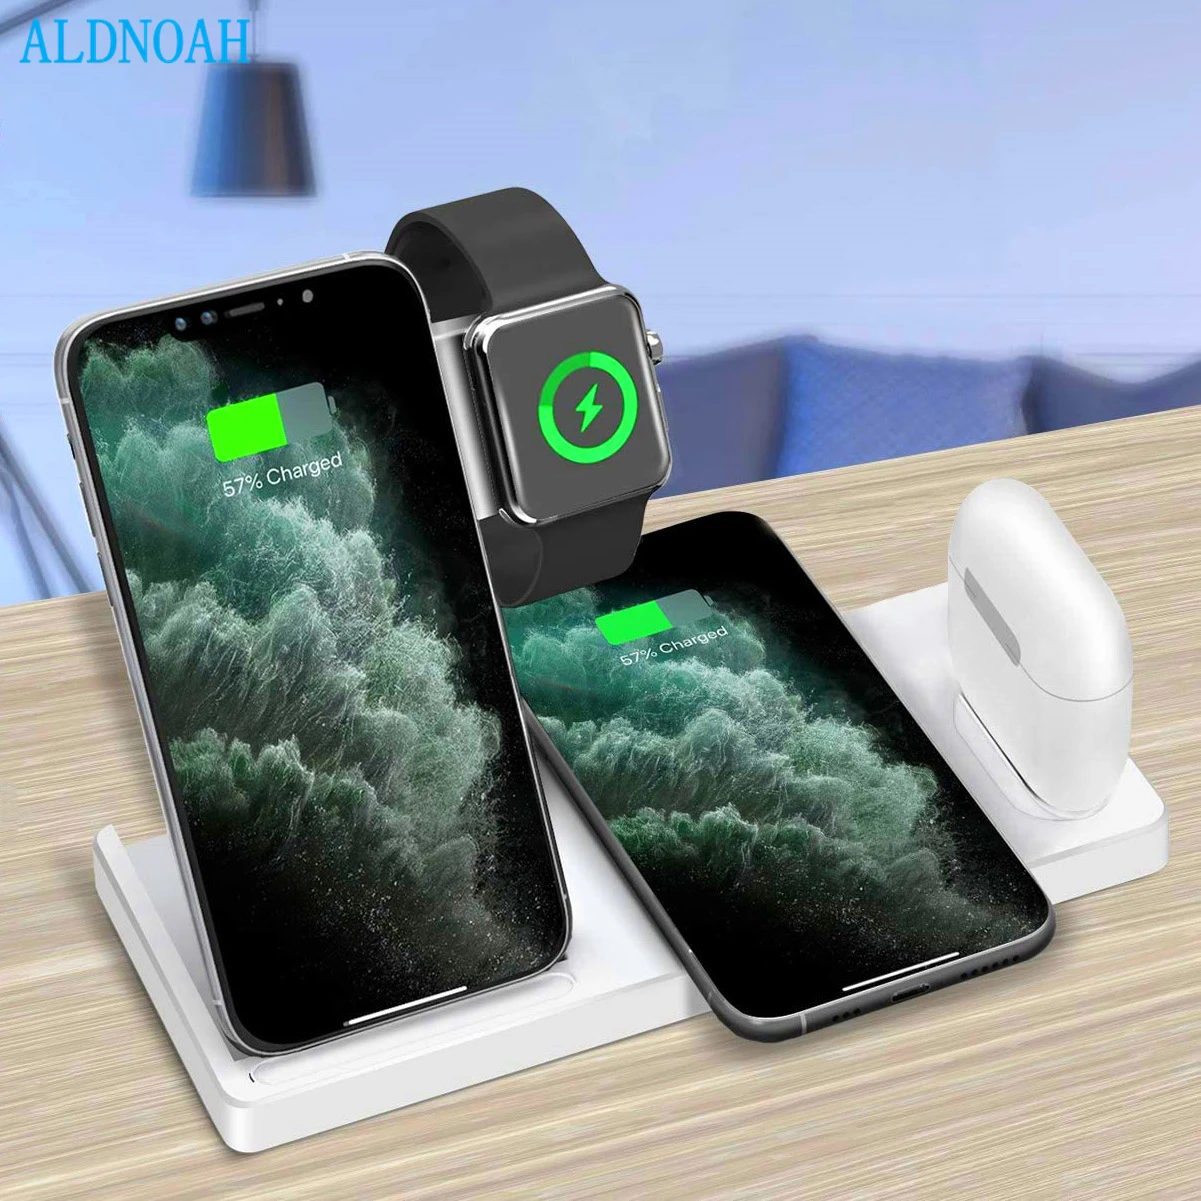 

ALDNOAH 15W Fast Wireless Charger 4 in 1 Charging Dock Station For iPhone 12 11 XS XR X 8 Apple Watch SE 6 5 4 3 AirPods Pro